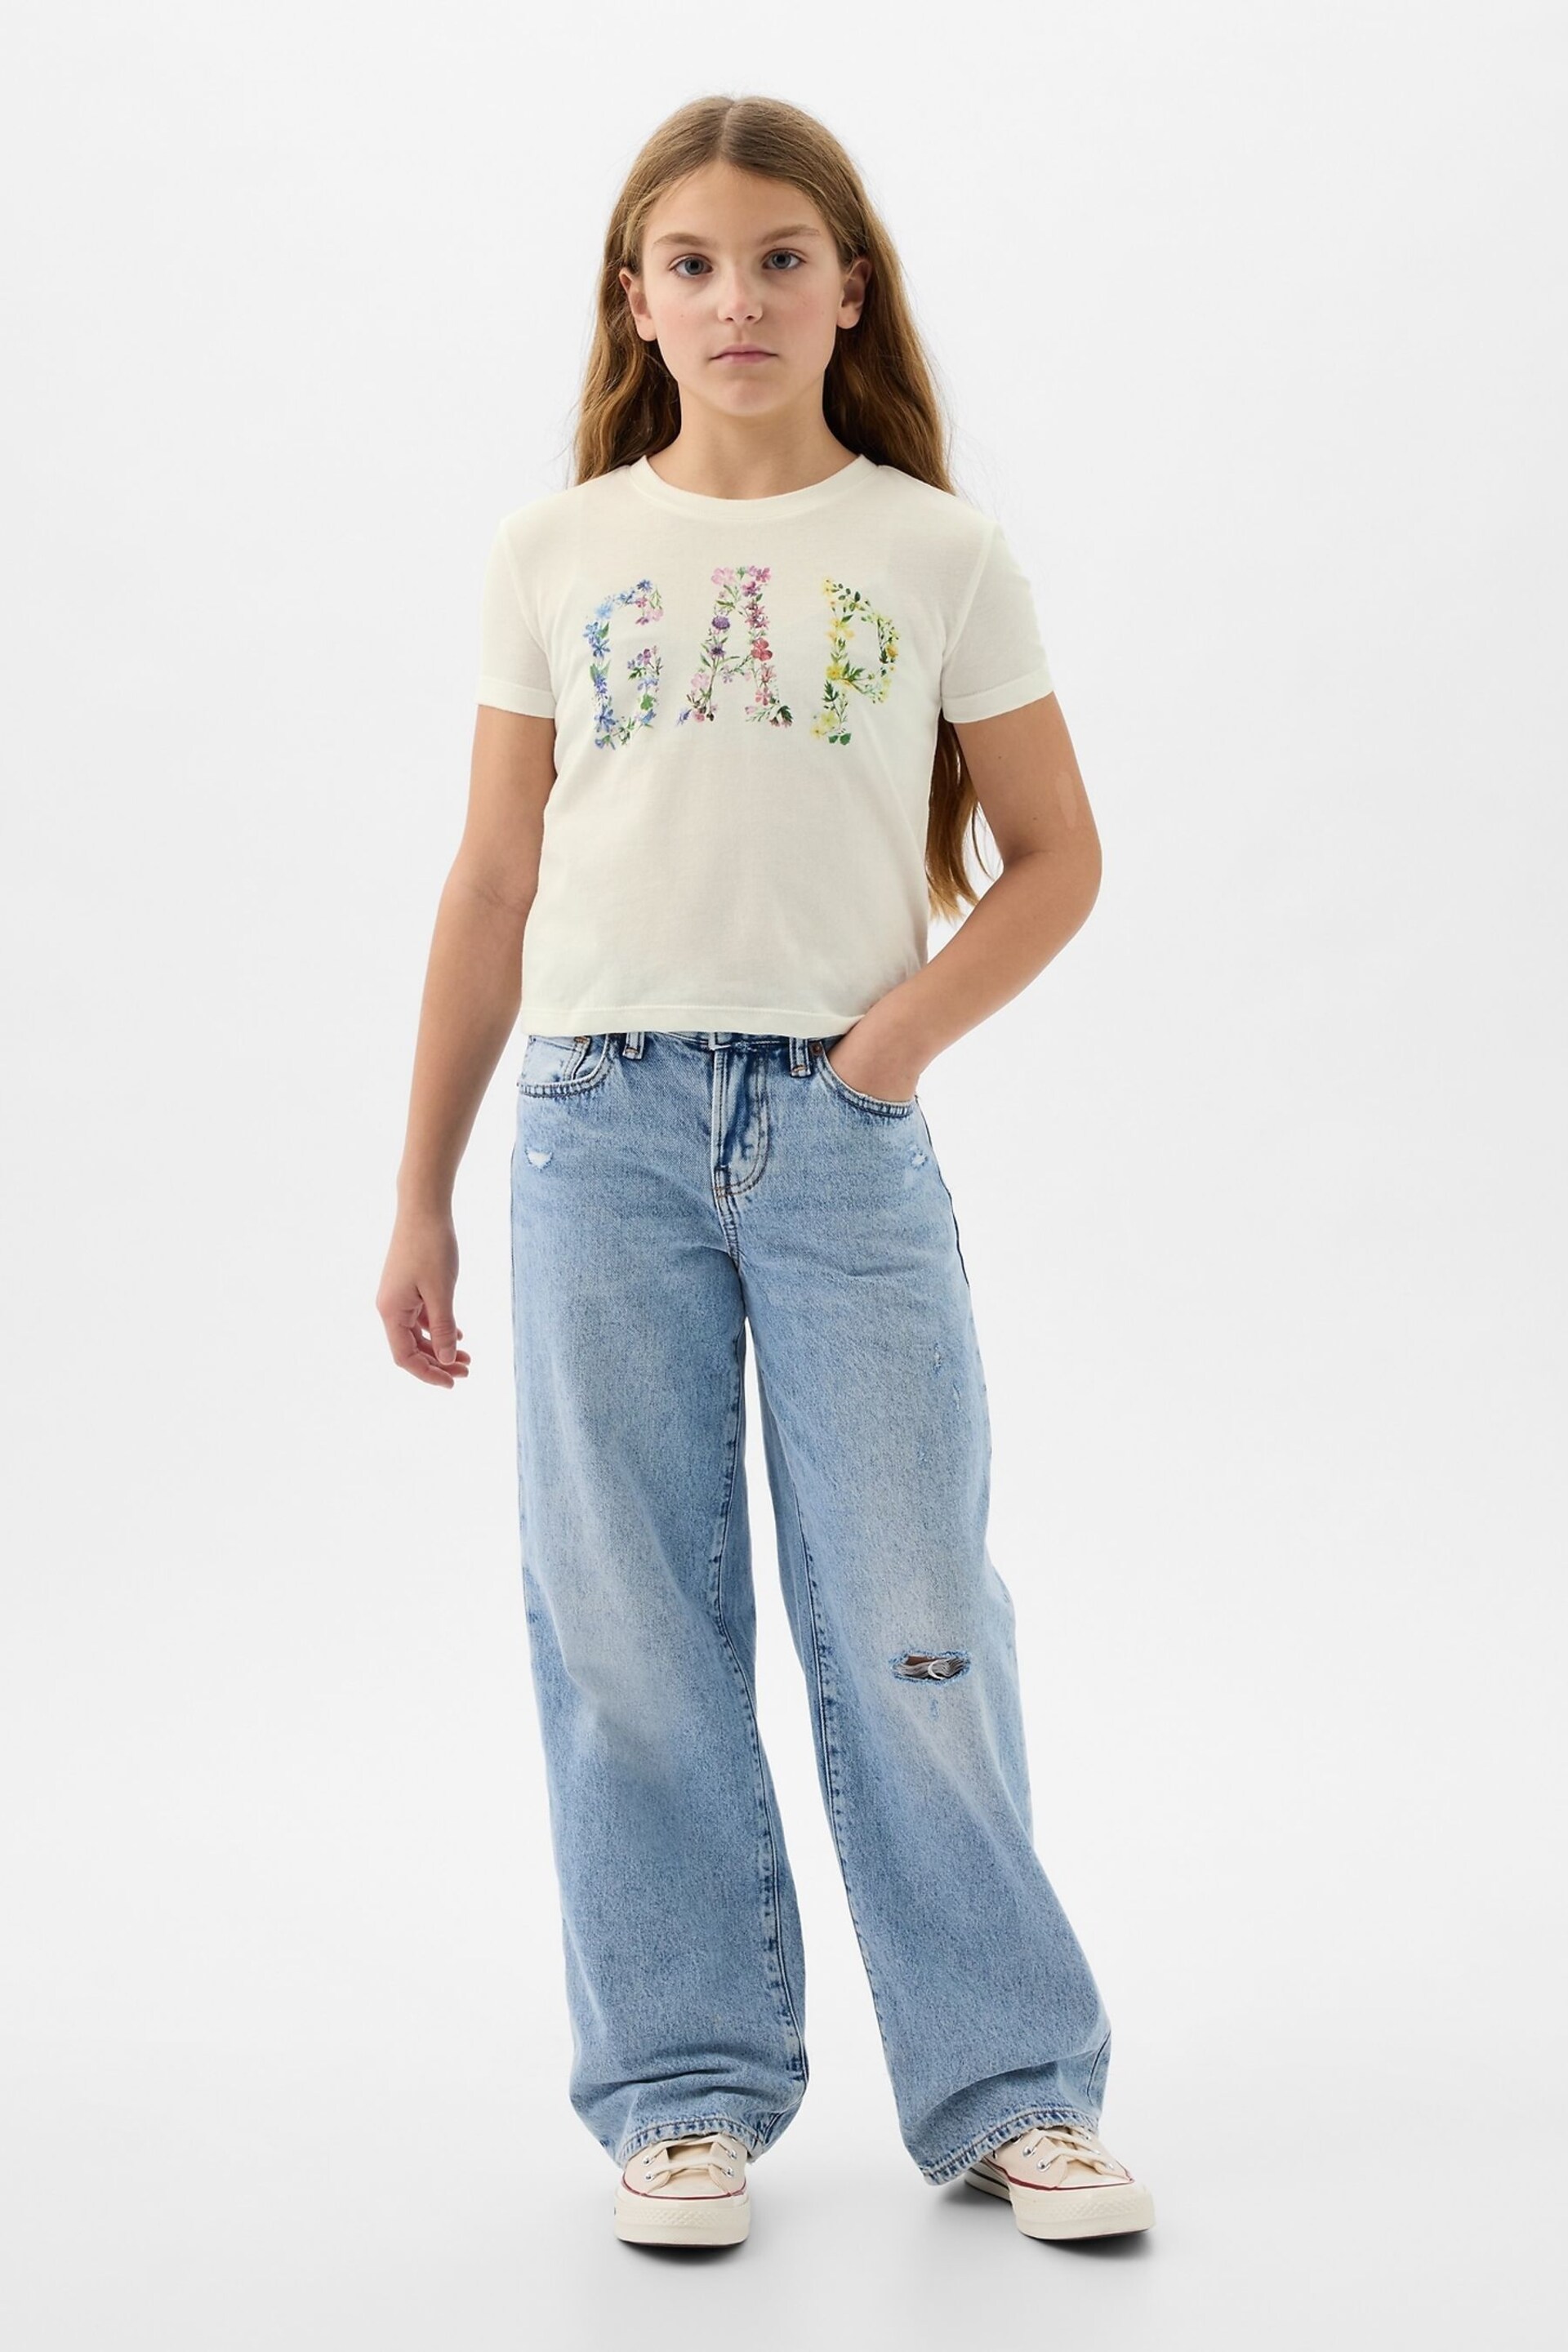 Gap White Floral Graphic Logo Short Sleeve Crew Neck T-Shirt (4-13yrs) - Image 3 of 3